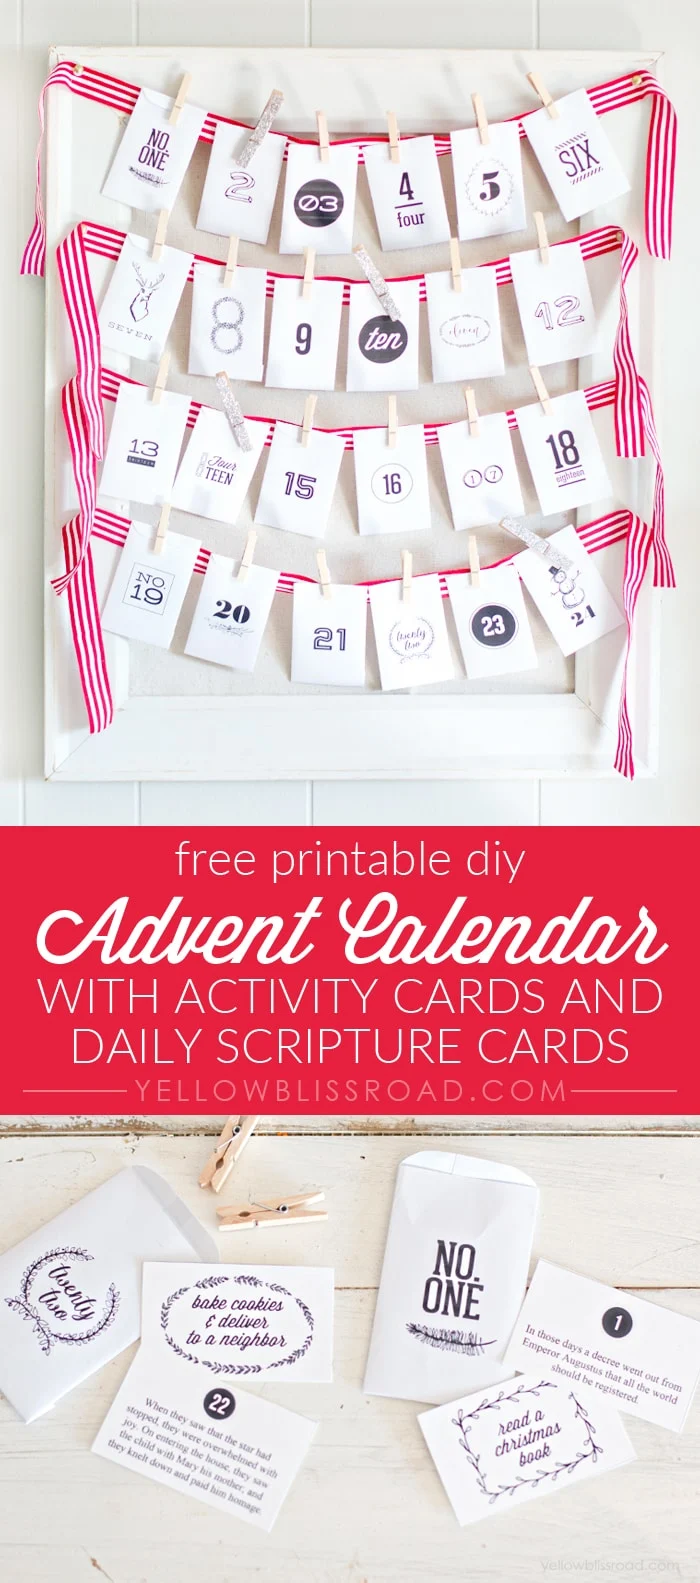 This free printable Advent Calendar set comes with printable envelopes, activity cards, and daily scripture cards. #Nativity #DIYAdventCalendar #FreePrintableChristmas